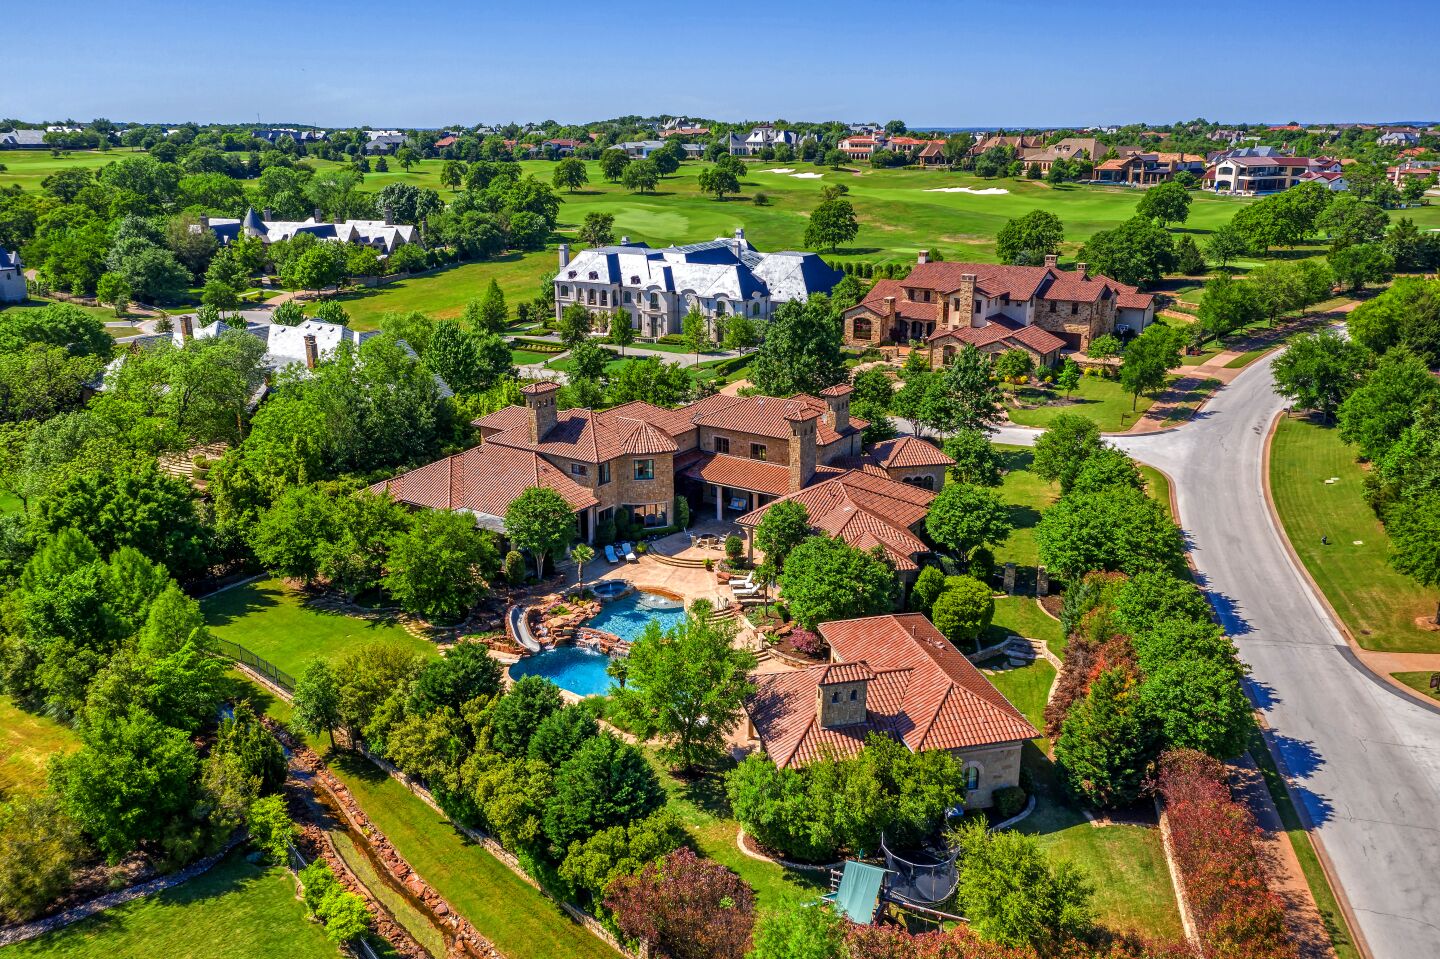 Former Dallas Cowboys tight end Jason Witten has put his home field in Westlake, Texas, on the market for $4.685 million.